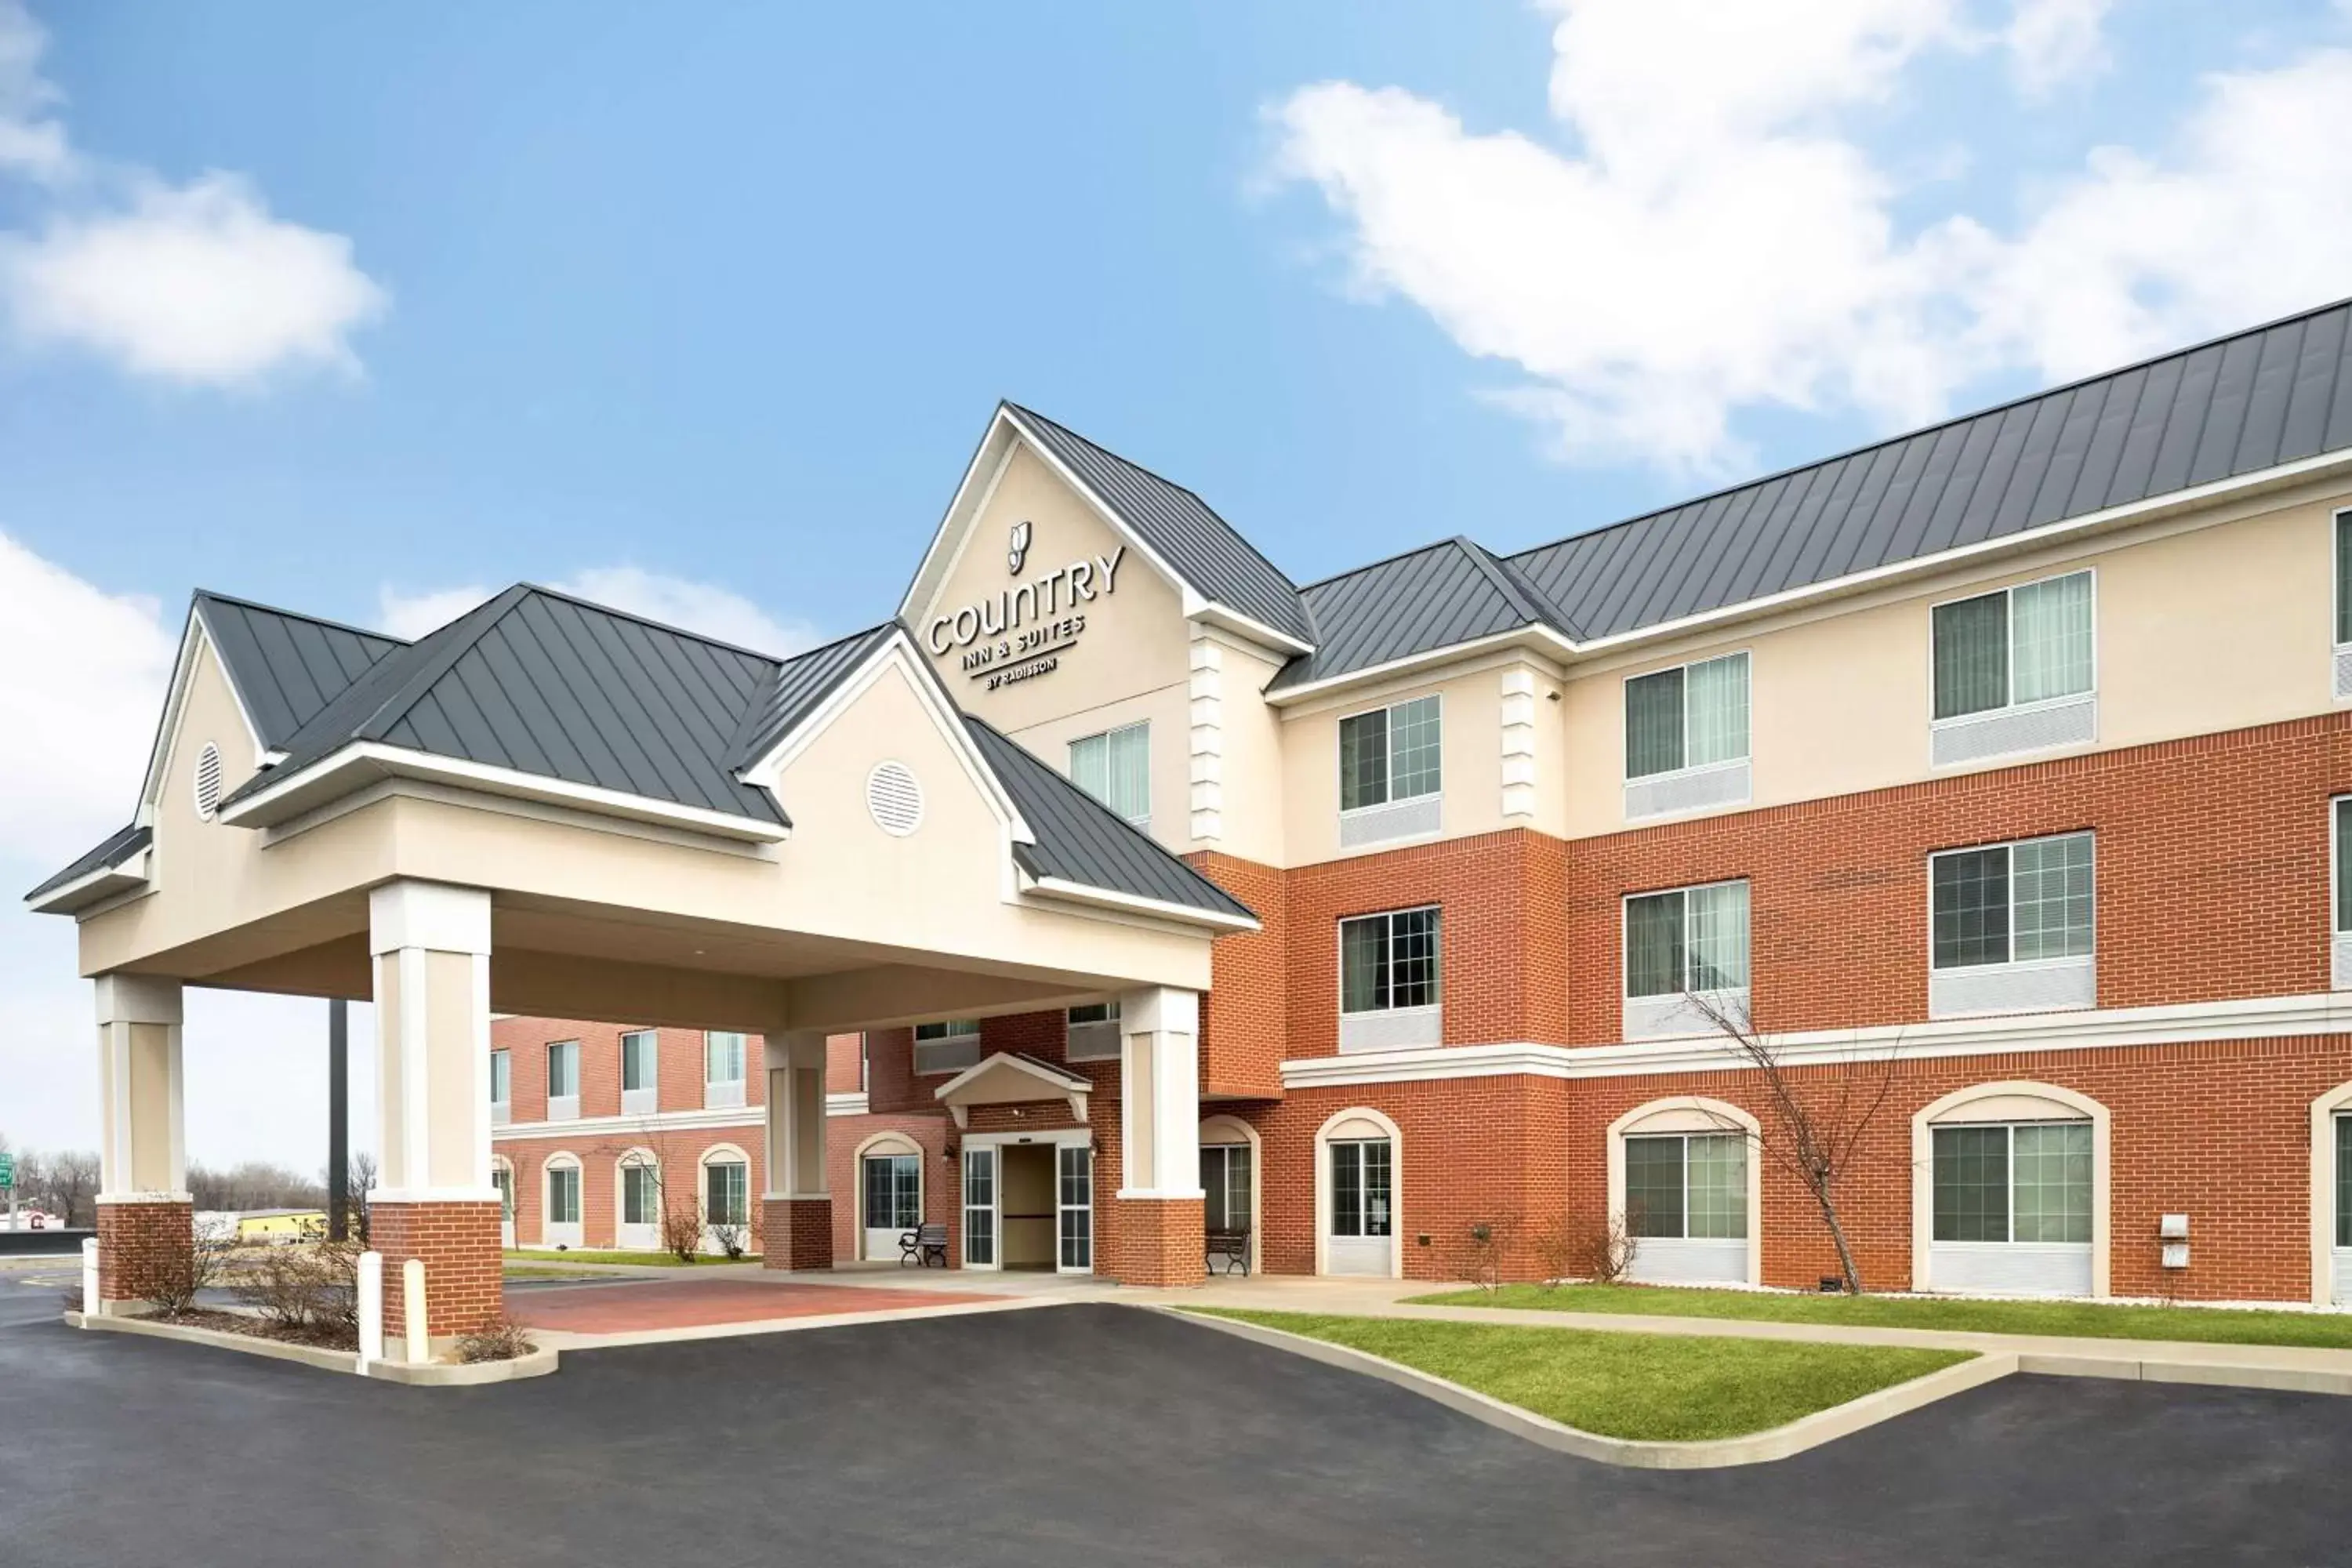 Property building in Country Inn & Suites by Radisson, St. Peters, MO